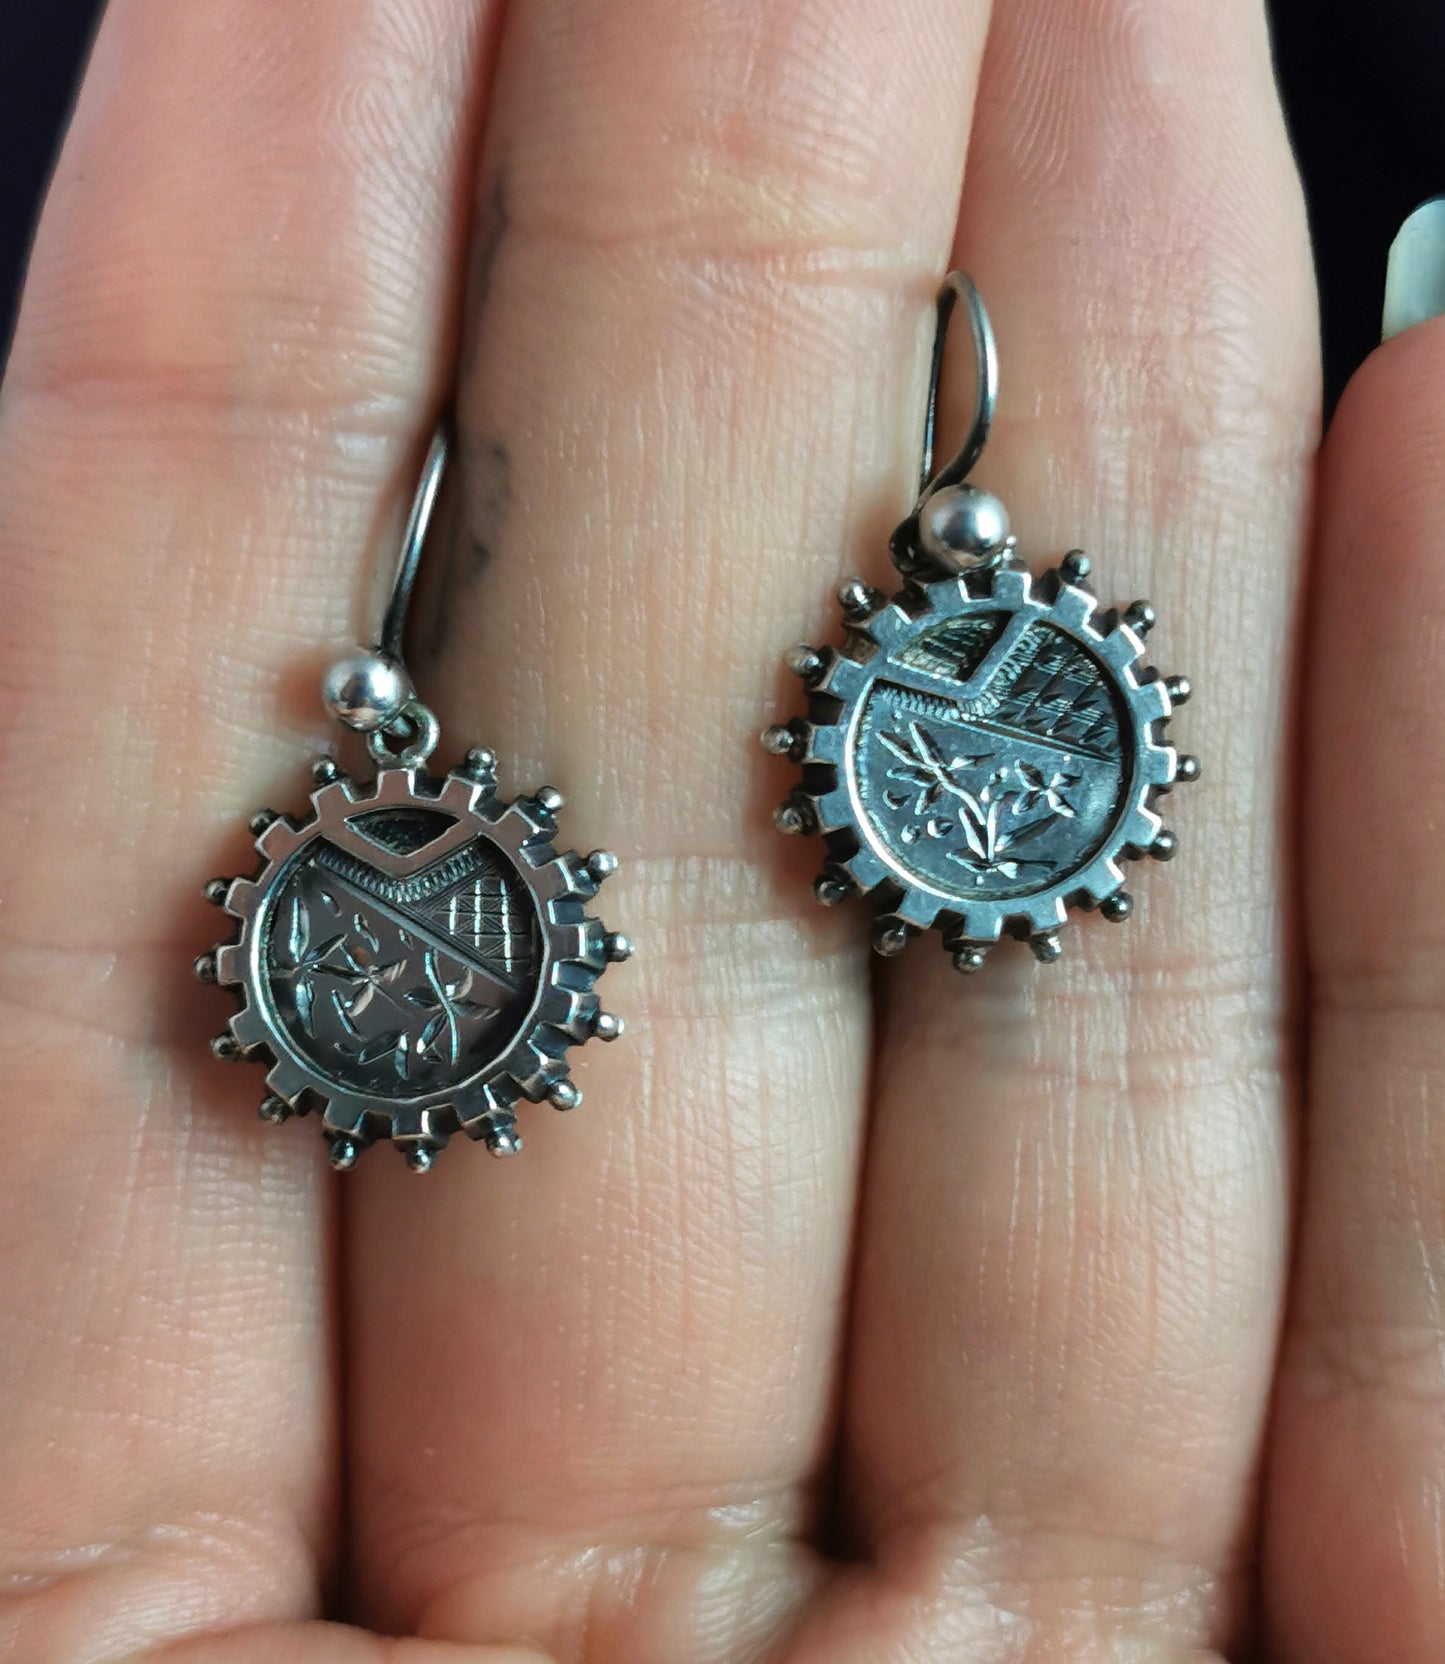 Antique Victorian silver aesthetic earrings, dangly